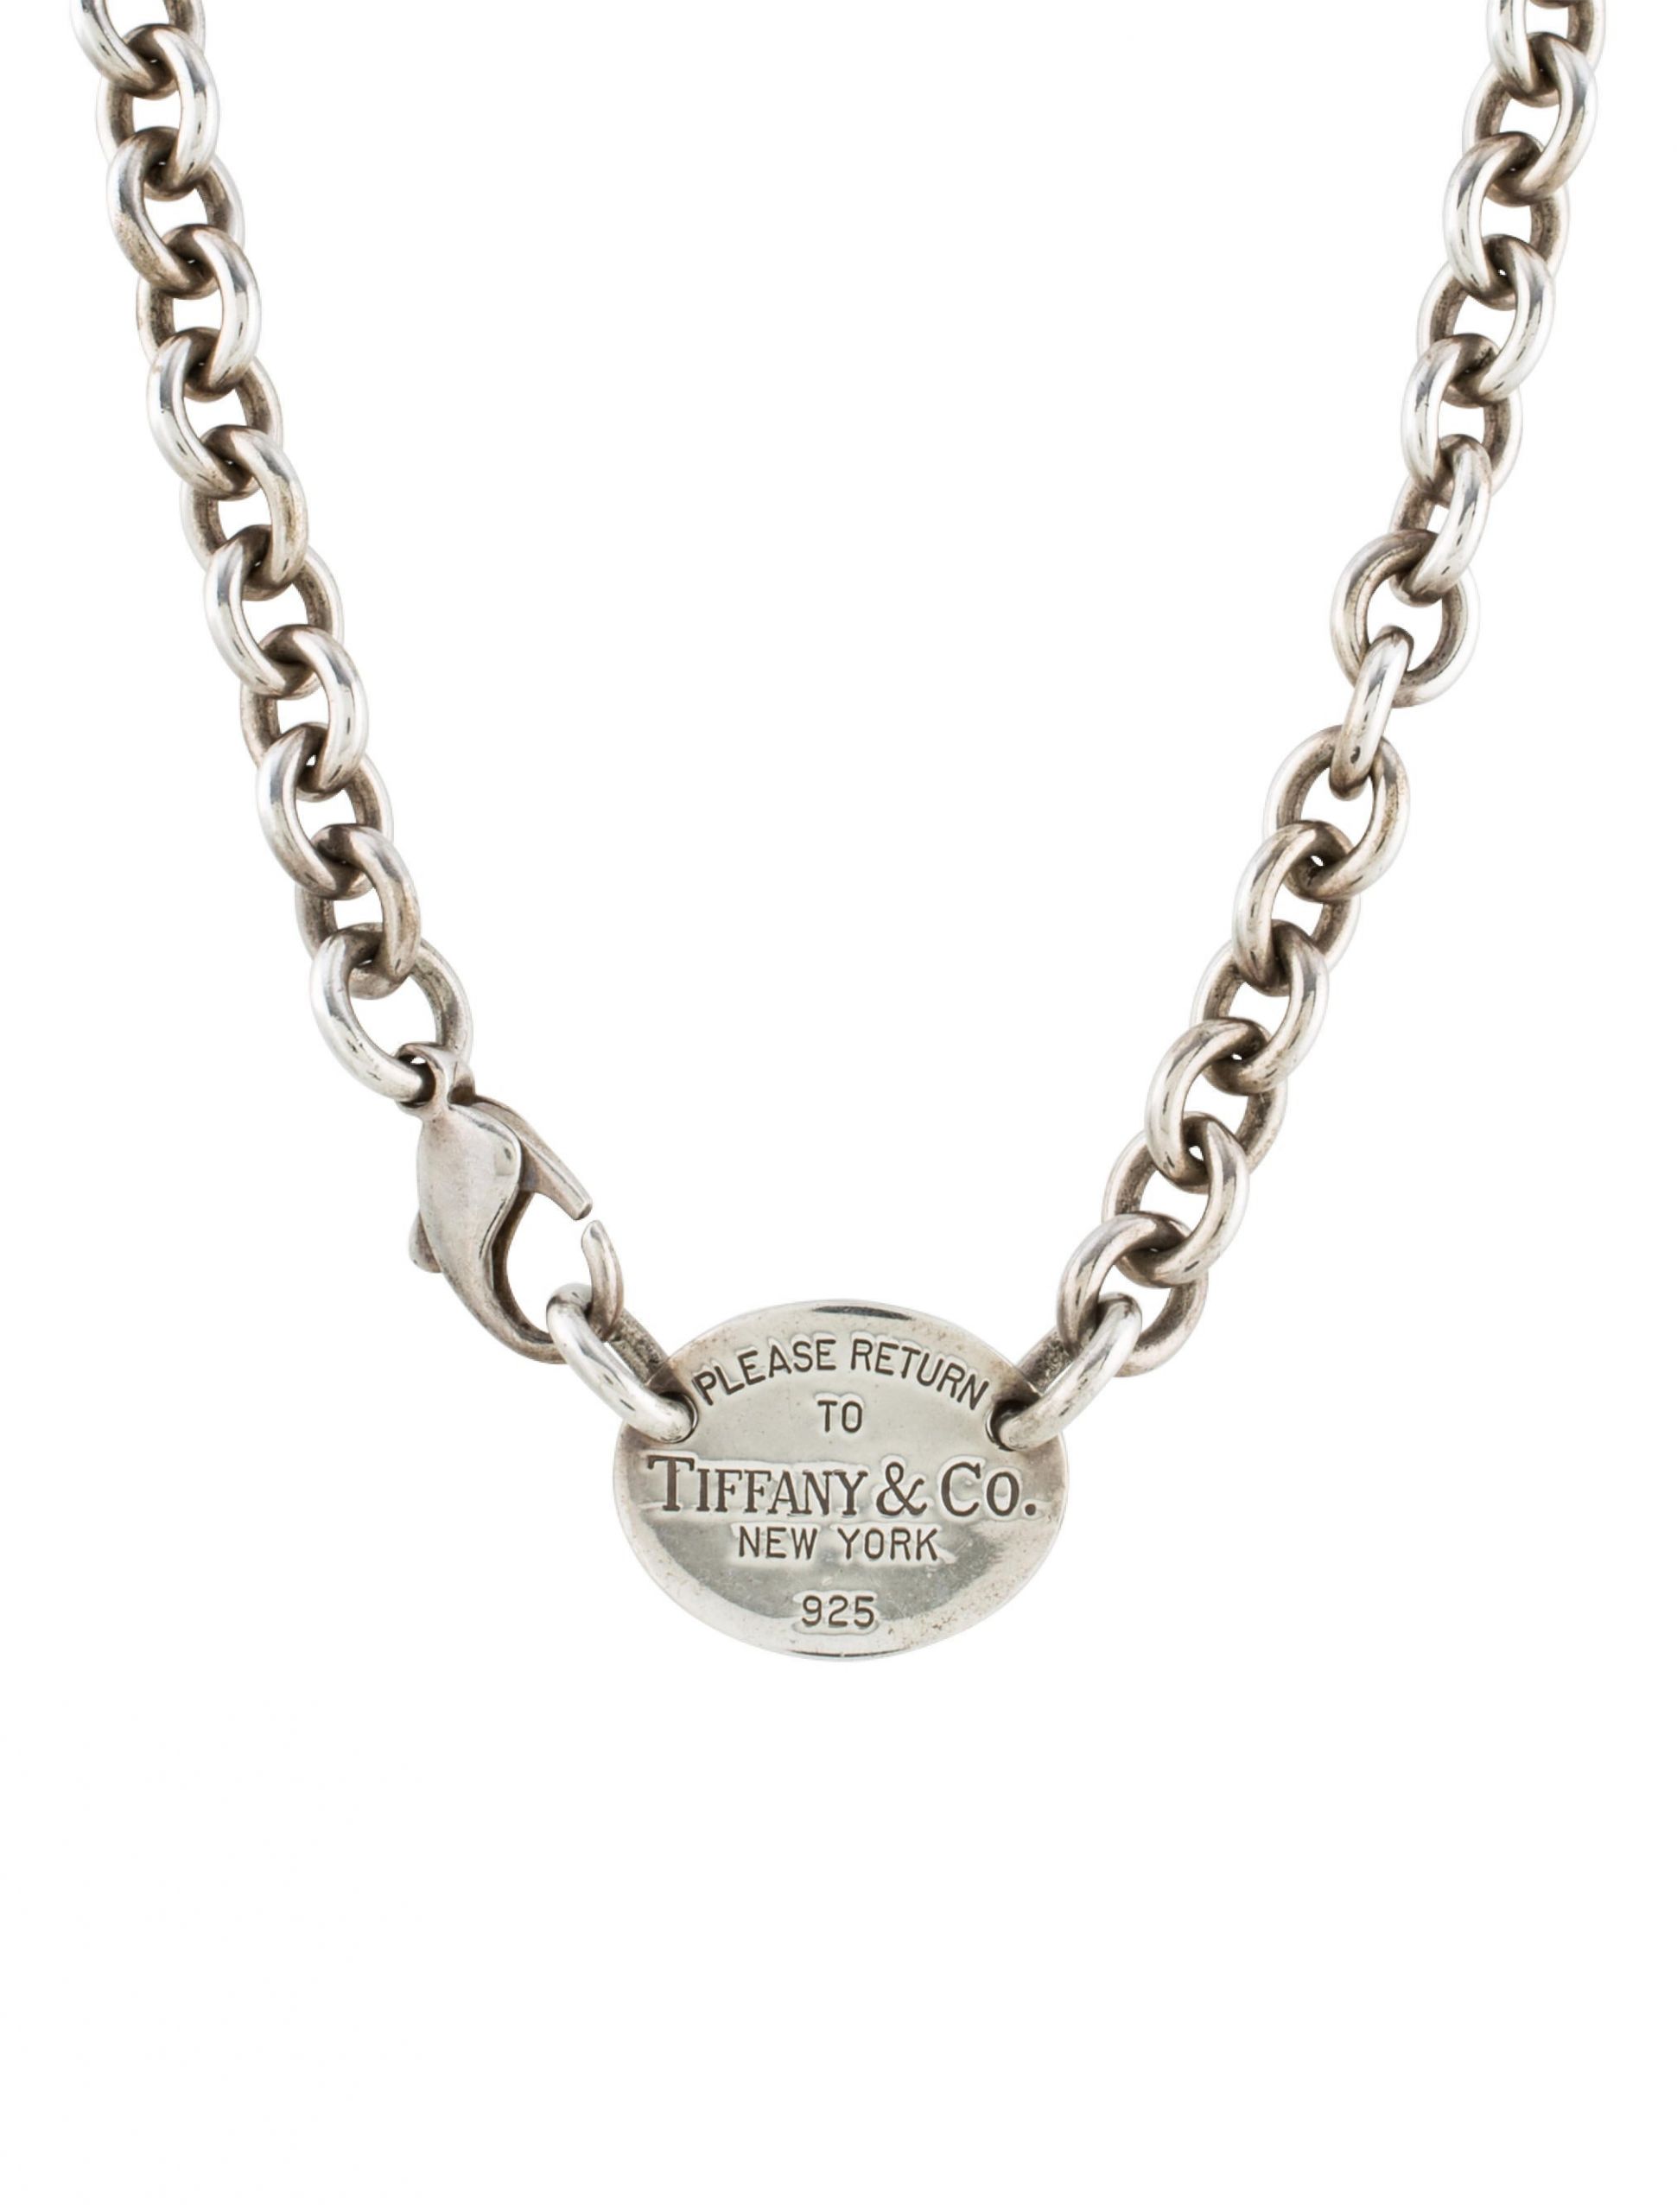 Tiffany And Co Necklace
 Tiffany & Co Return To Tiffany Oval Tag Necklace